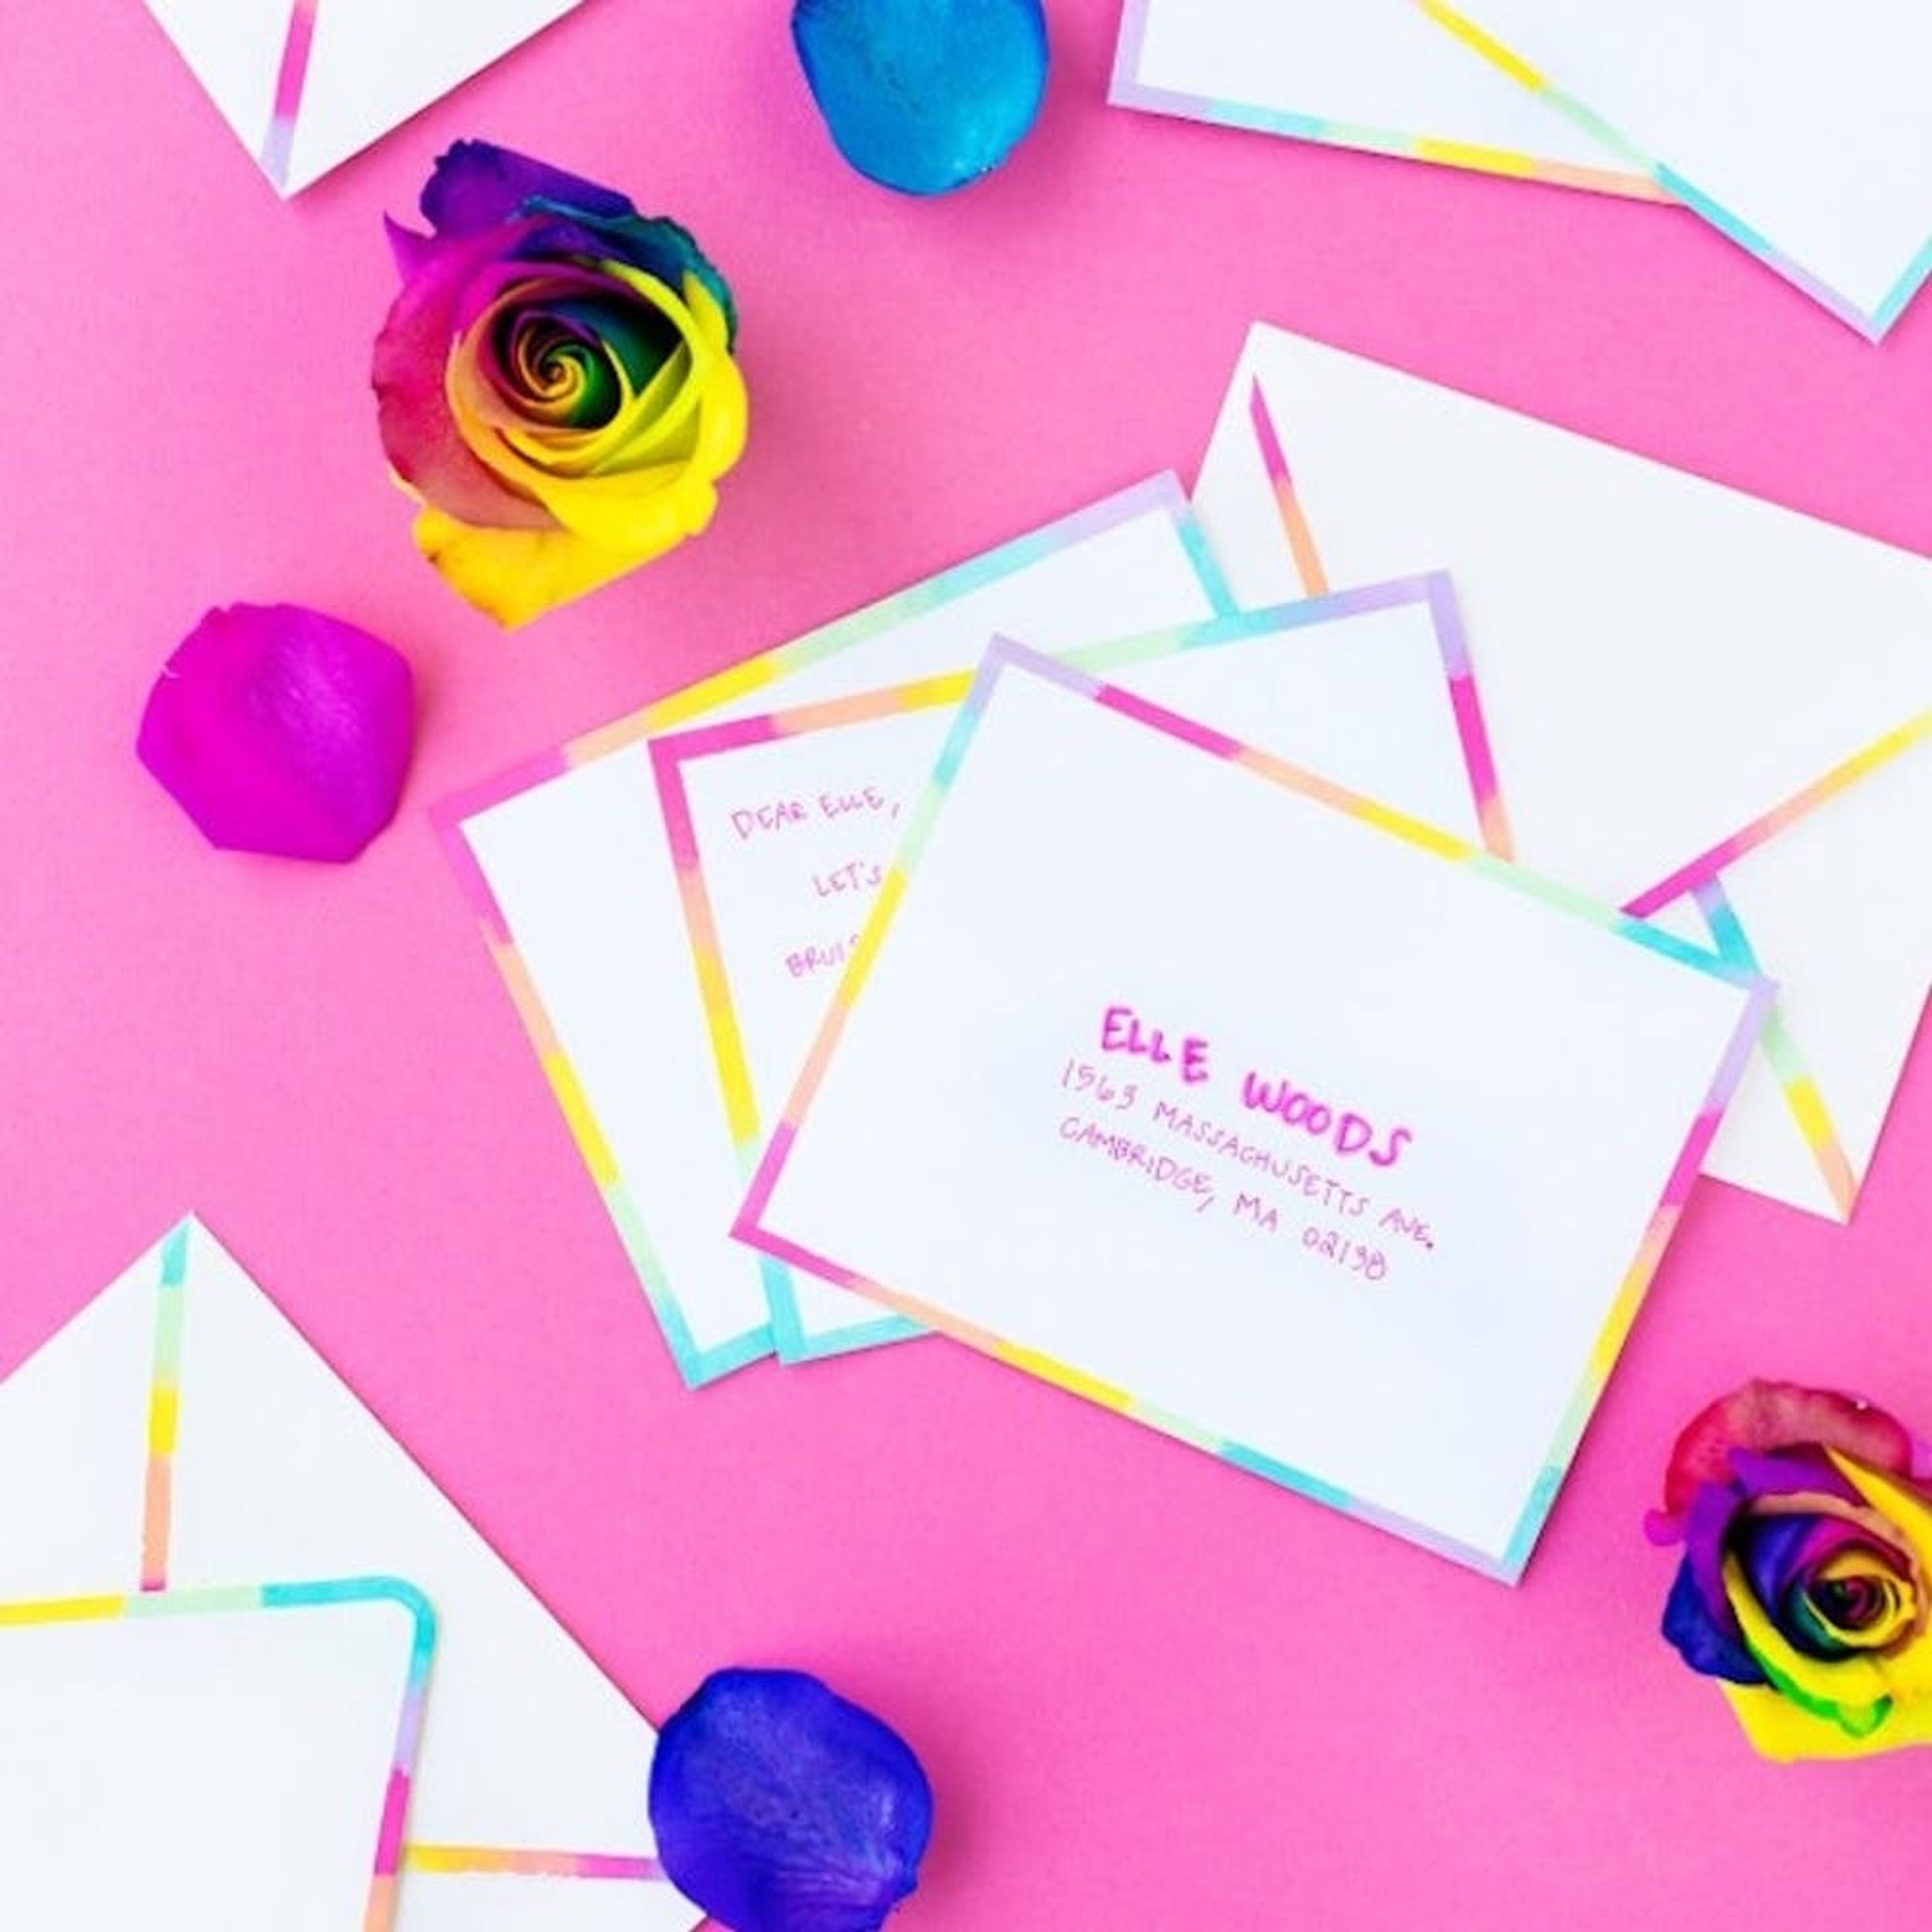 What to Make This Weekend: Rainbow Stationery, Pom Pom Headband + More